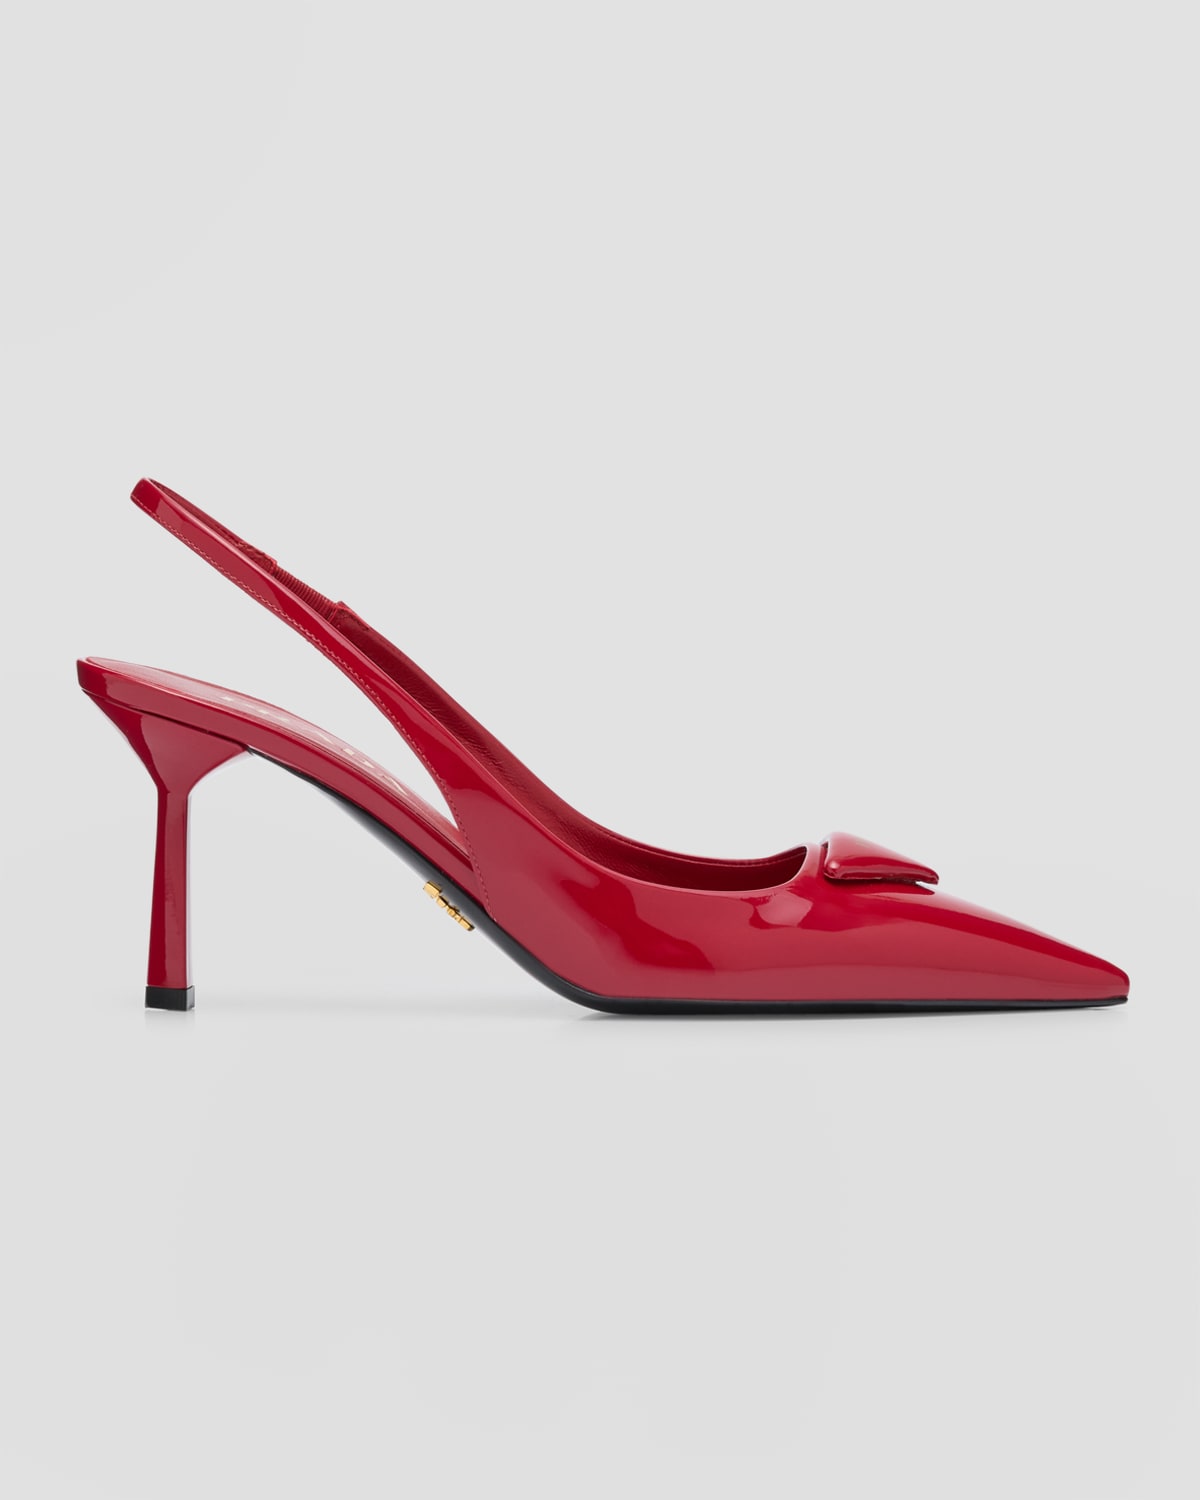 Prada Patent Leather Slingback Pumps In Cherry